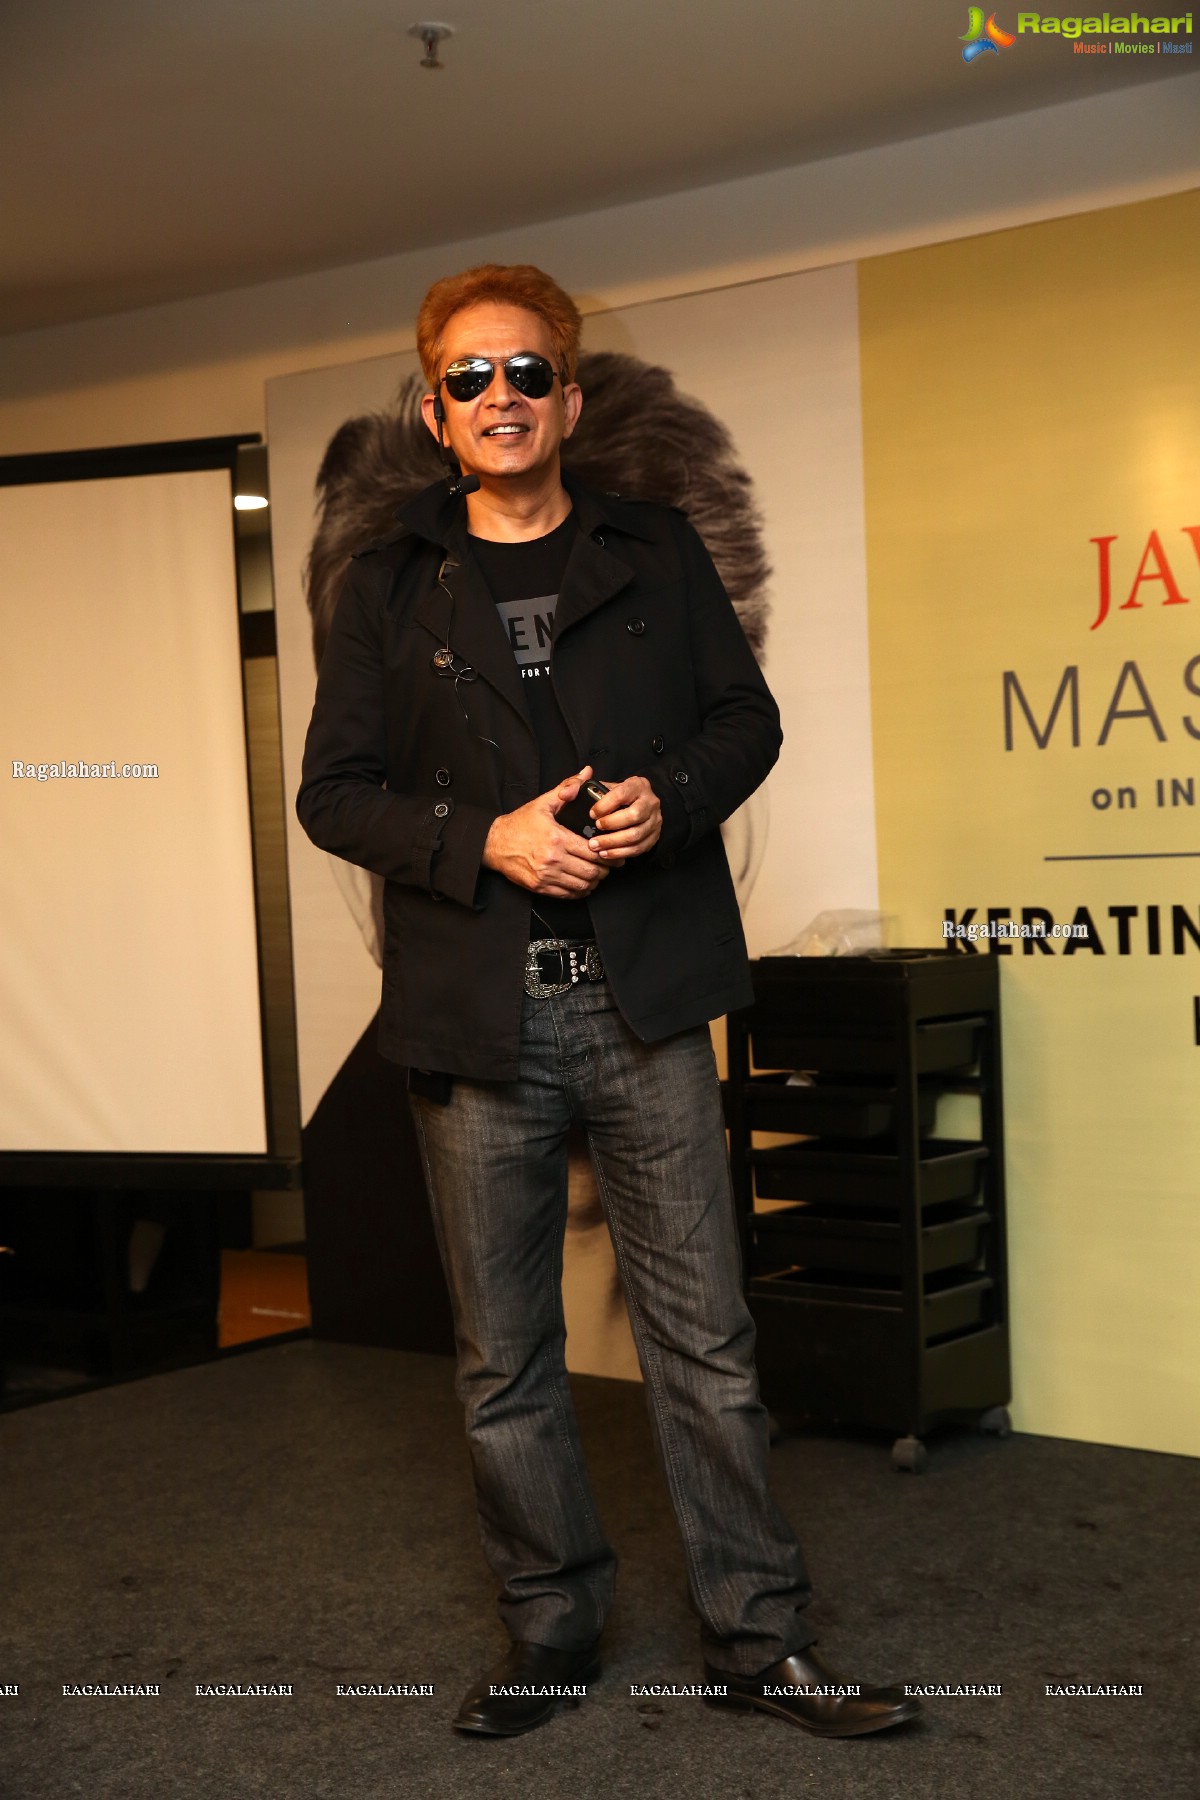 Jawed Habib Master Class on Innovation & Techniques in Kratin, Cysteine & Botox Hair Services at Lemon Tree Hotels